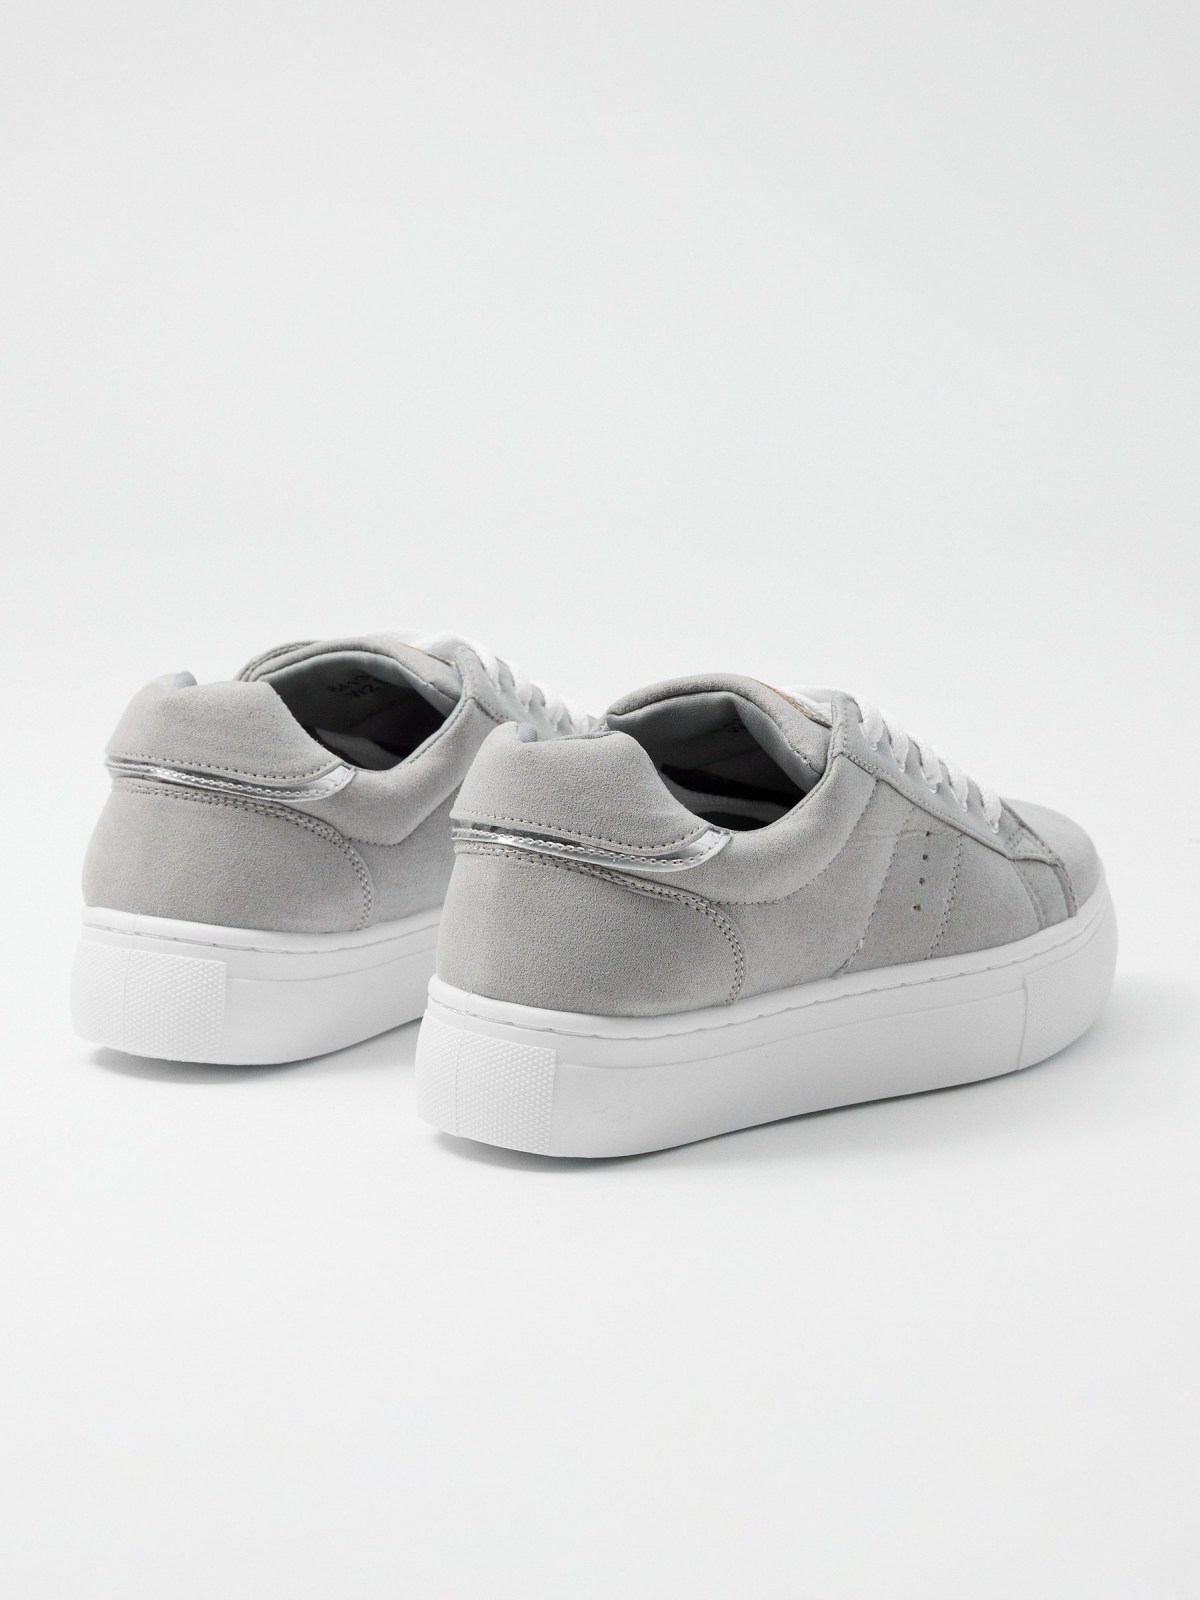 Casual sneaker with silverofmra grey 45º back view